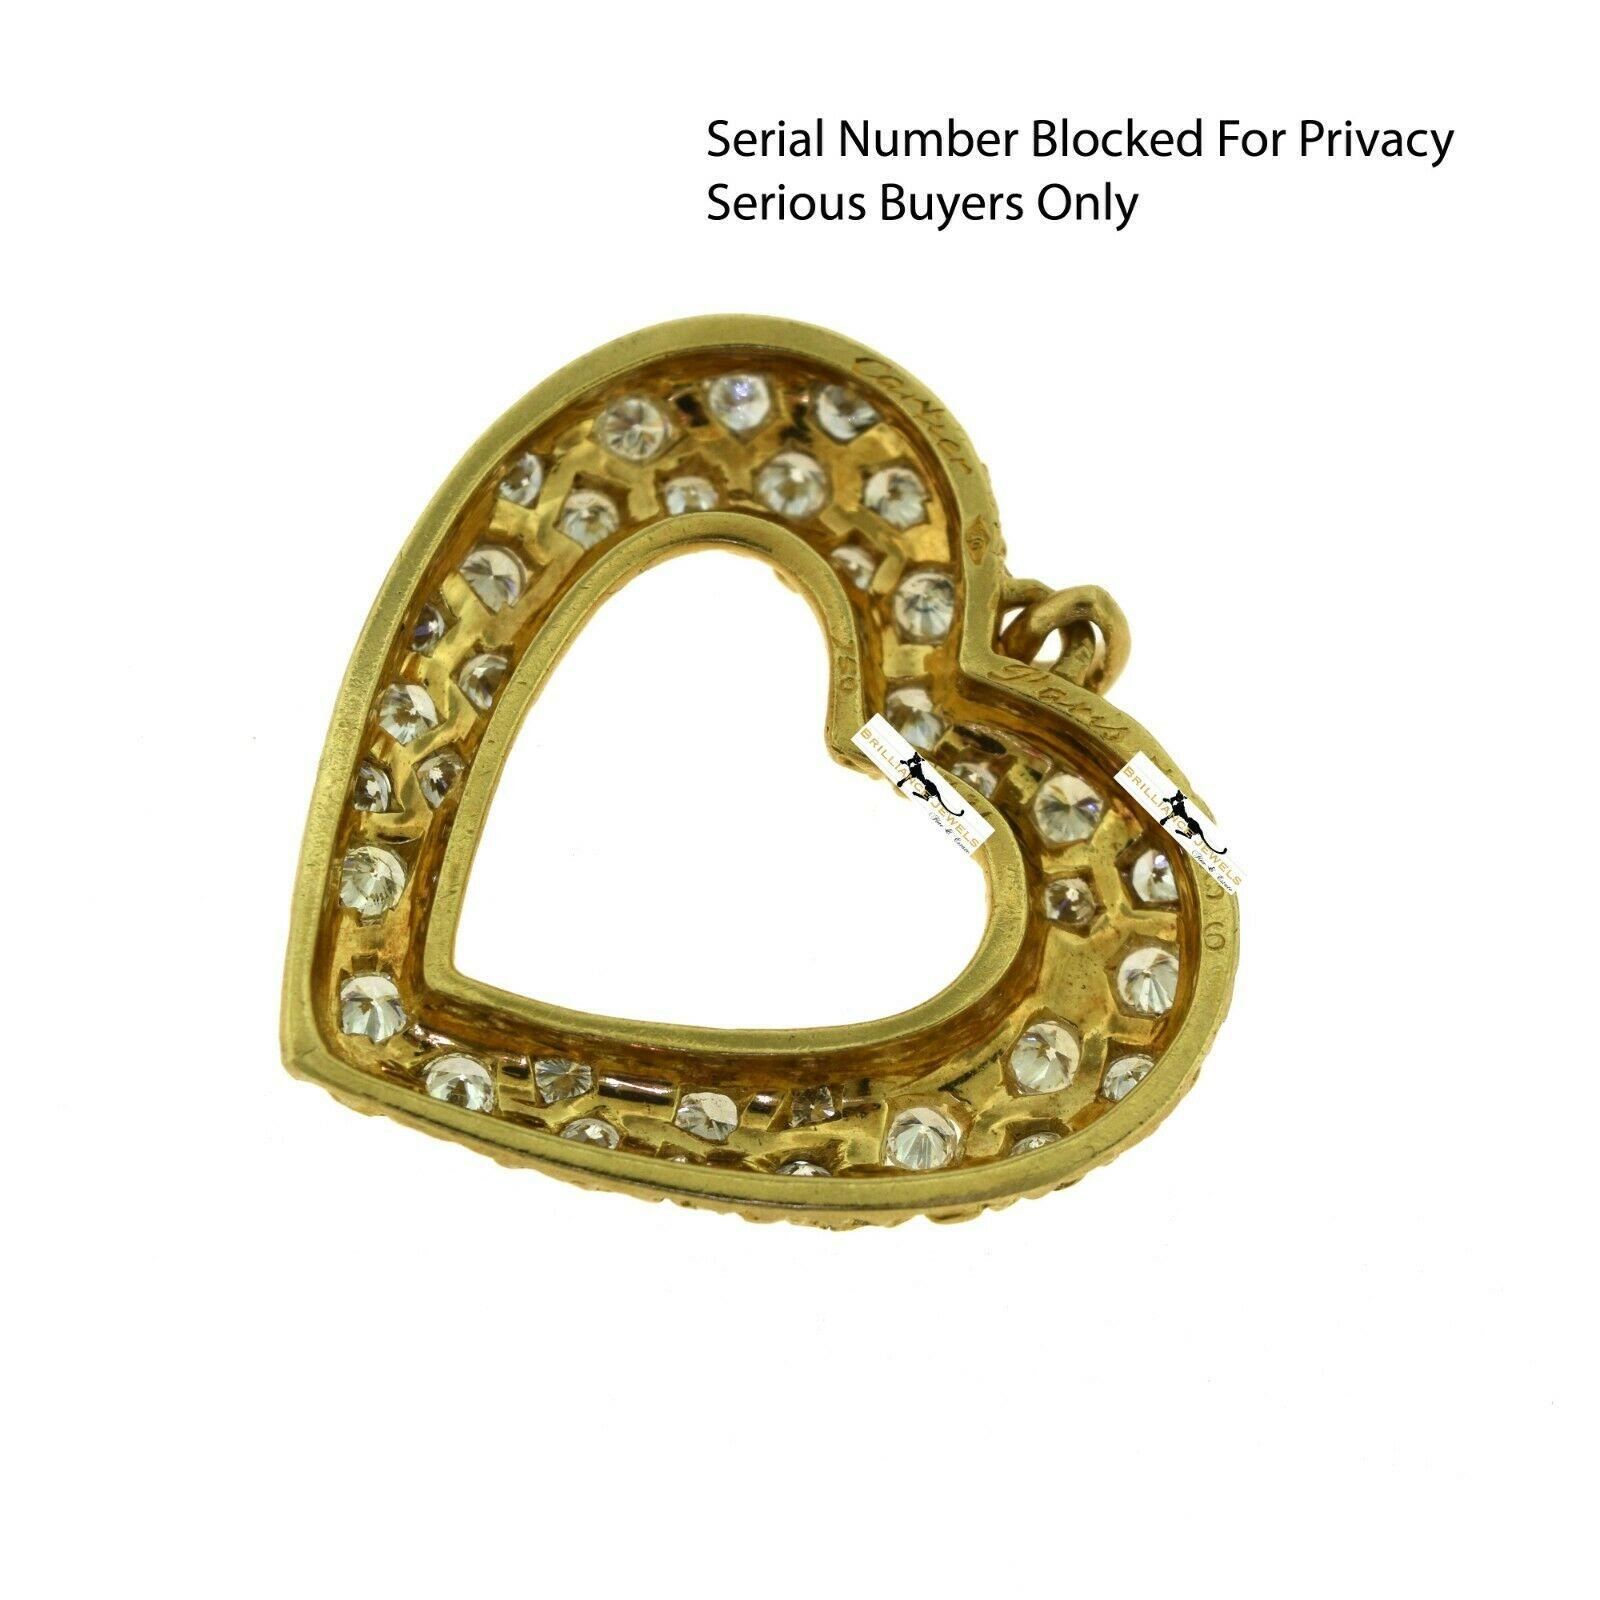 Brilliant Cut Cartier French Paris Large Heart Diamond Paved Pendant Necklace in Yellow Gold